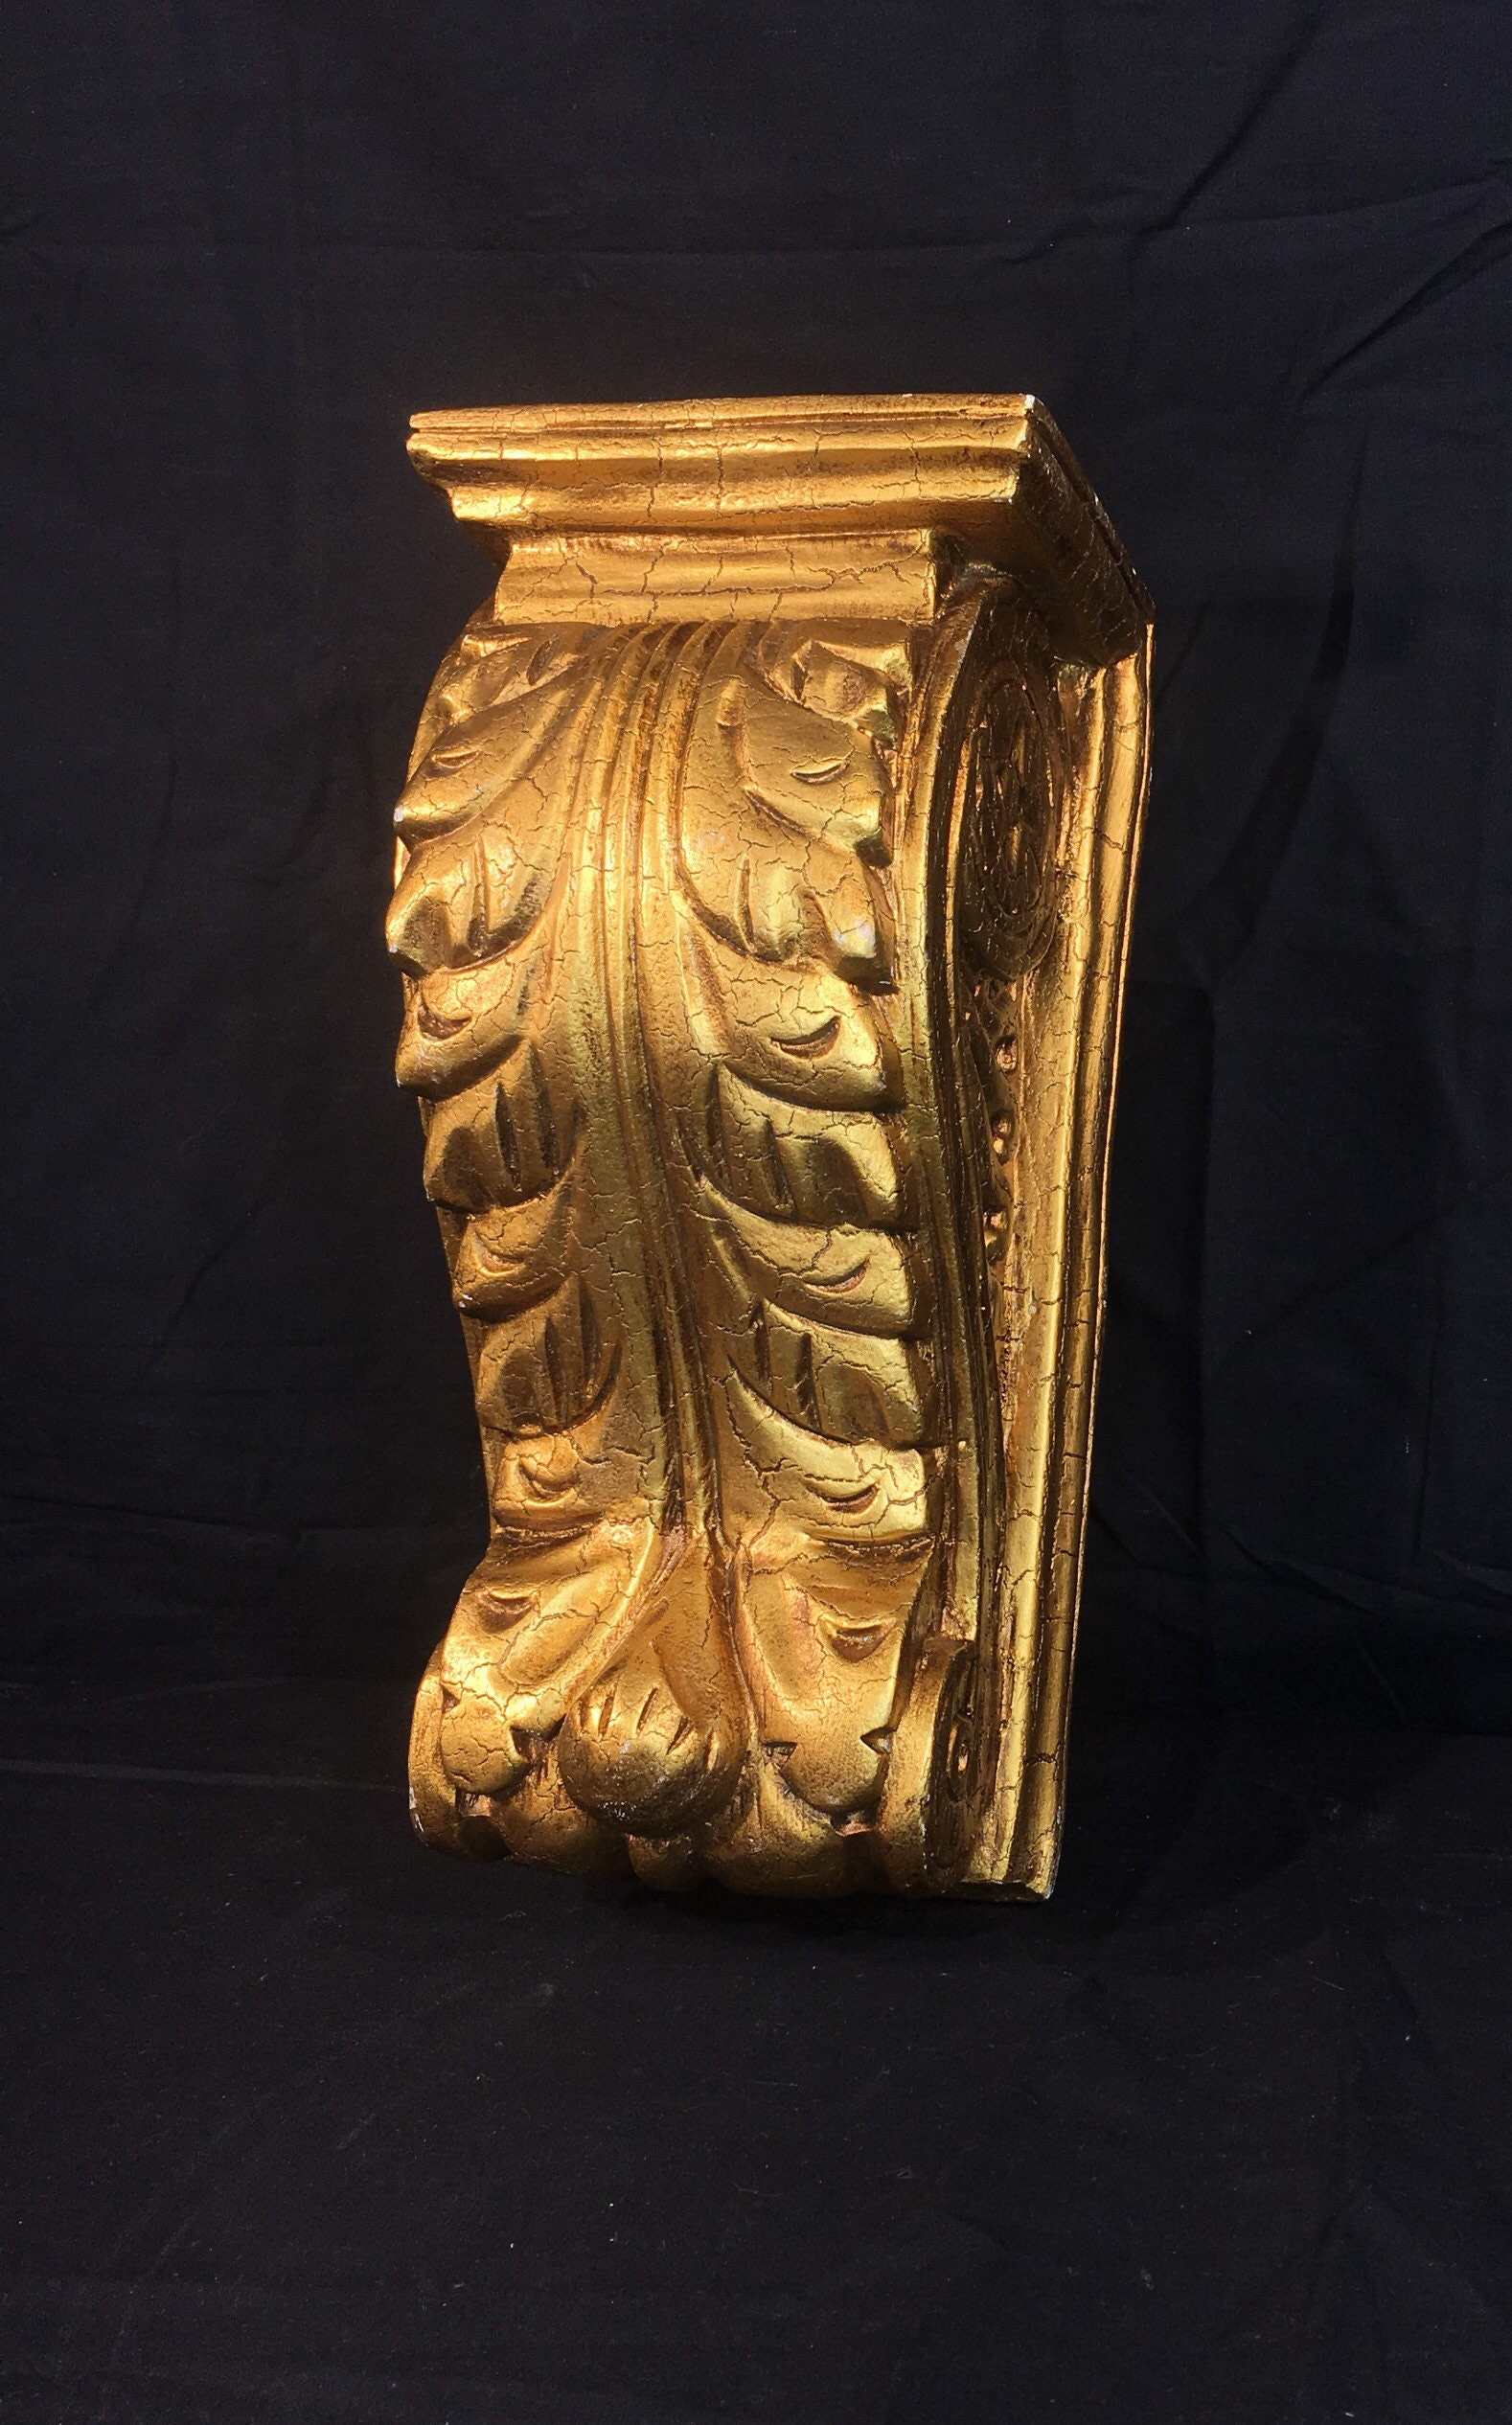 Vintage Gold Wall Shelf, Florentine Sconce, Carved Wooden ... on Wooden Wall Sconce Shelf Decorating id=54350